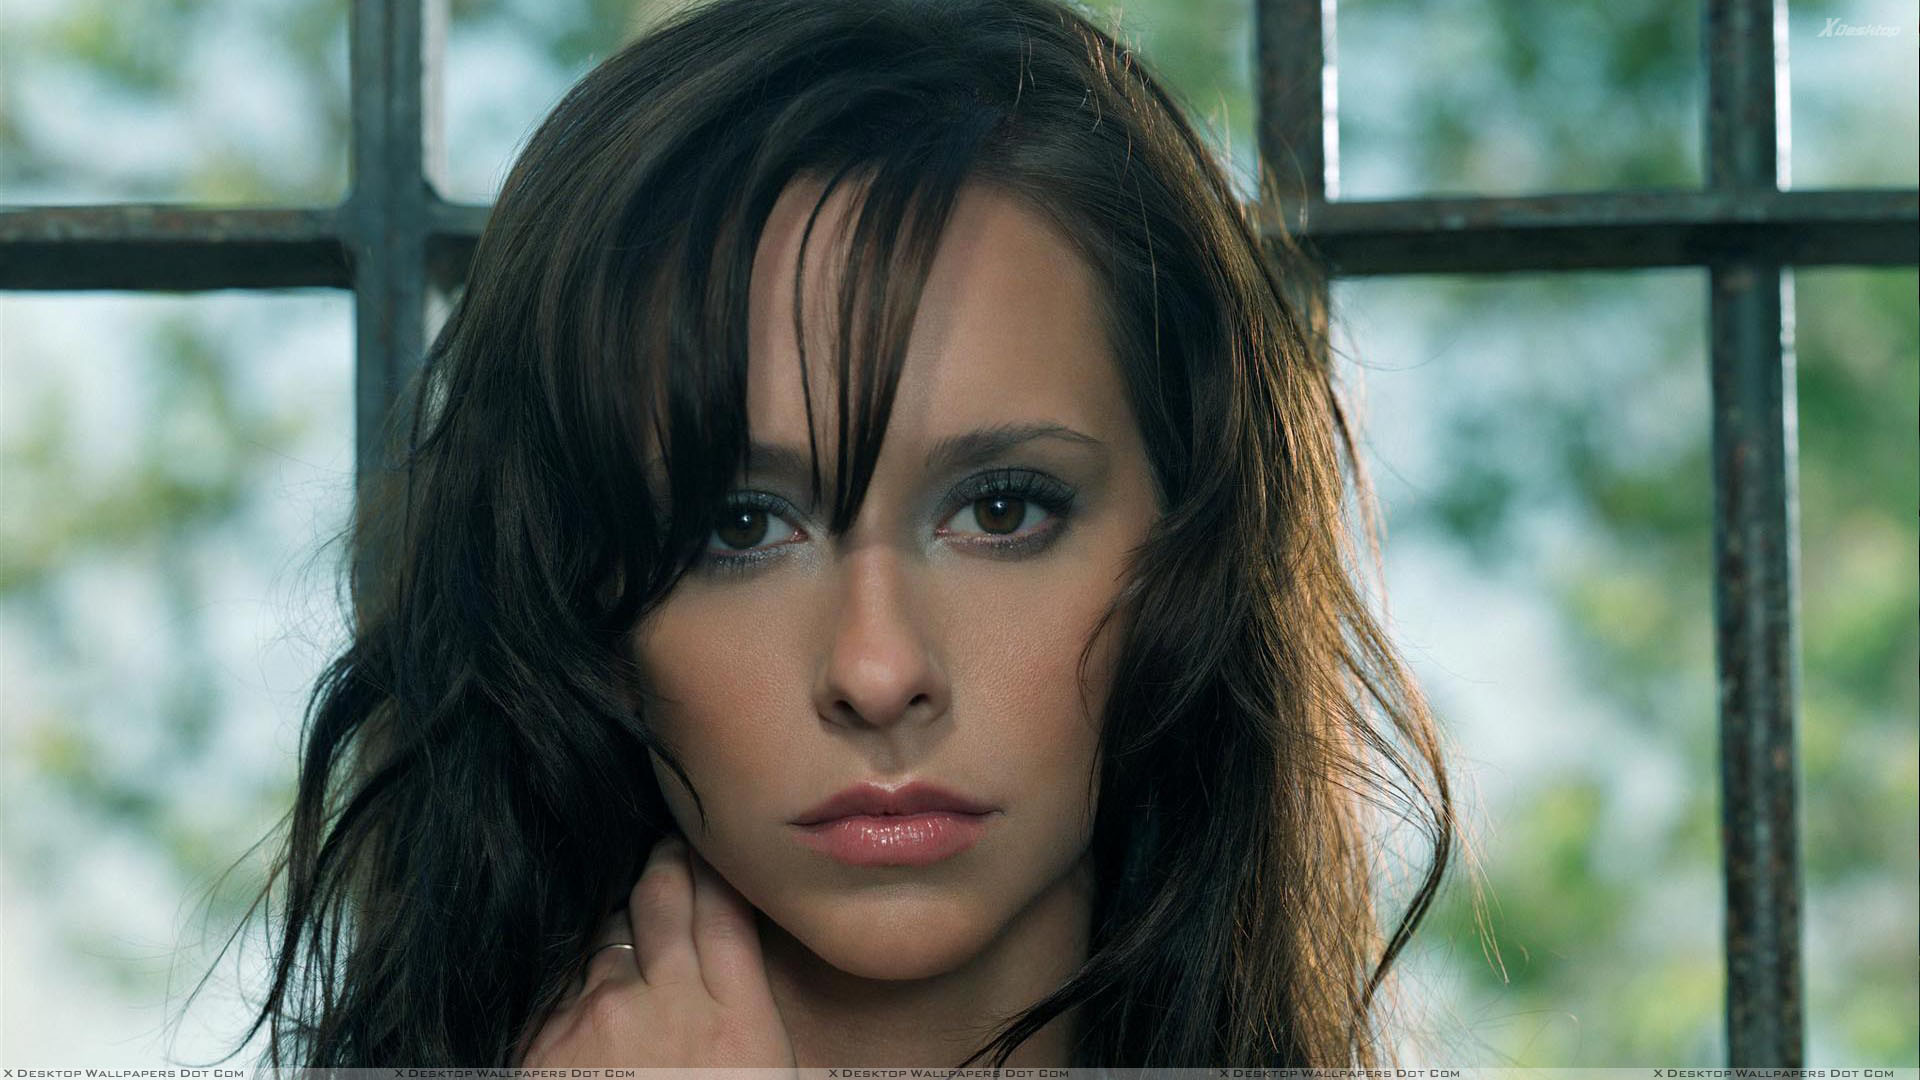 1920x1080 You are viewing wallpaper titled "Jennifer Love Hewitt Pink Lips And Cute  Face Closeup" ...